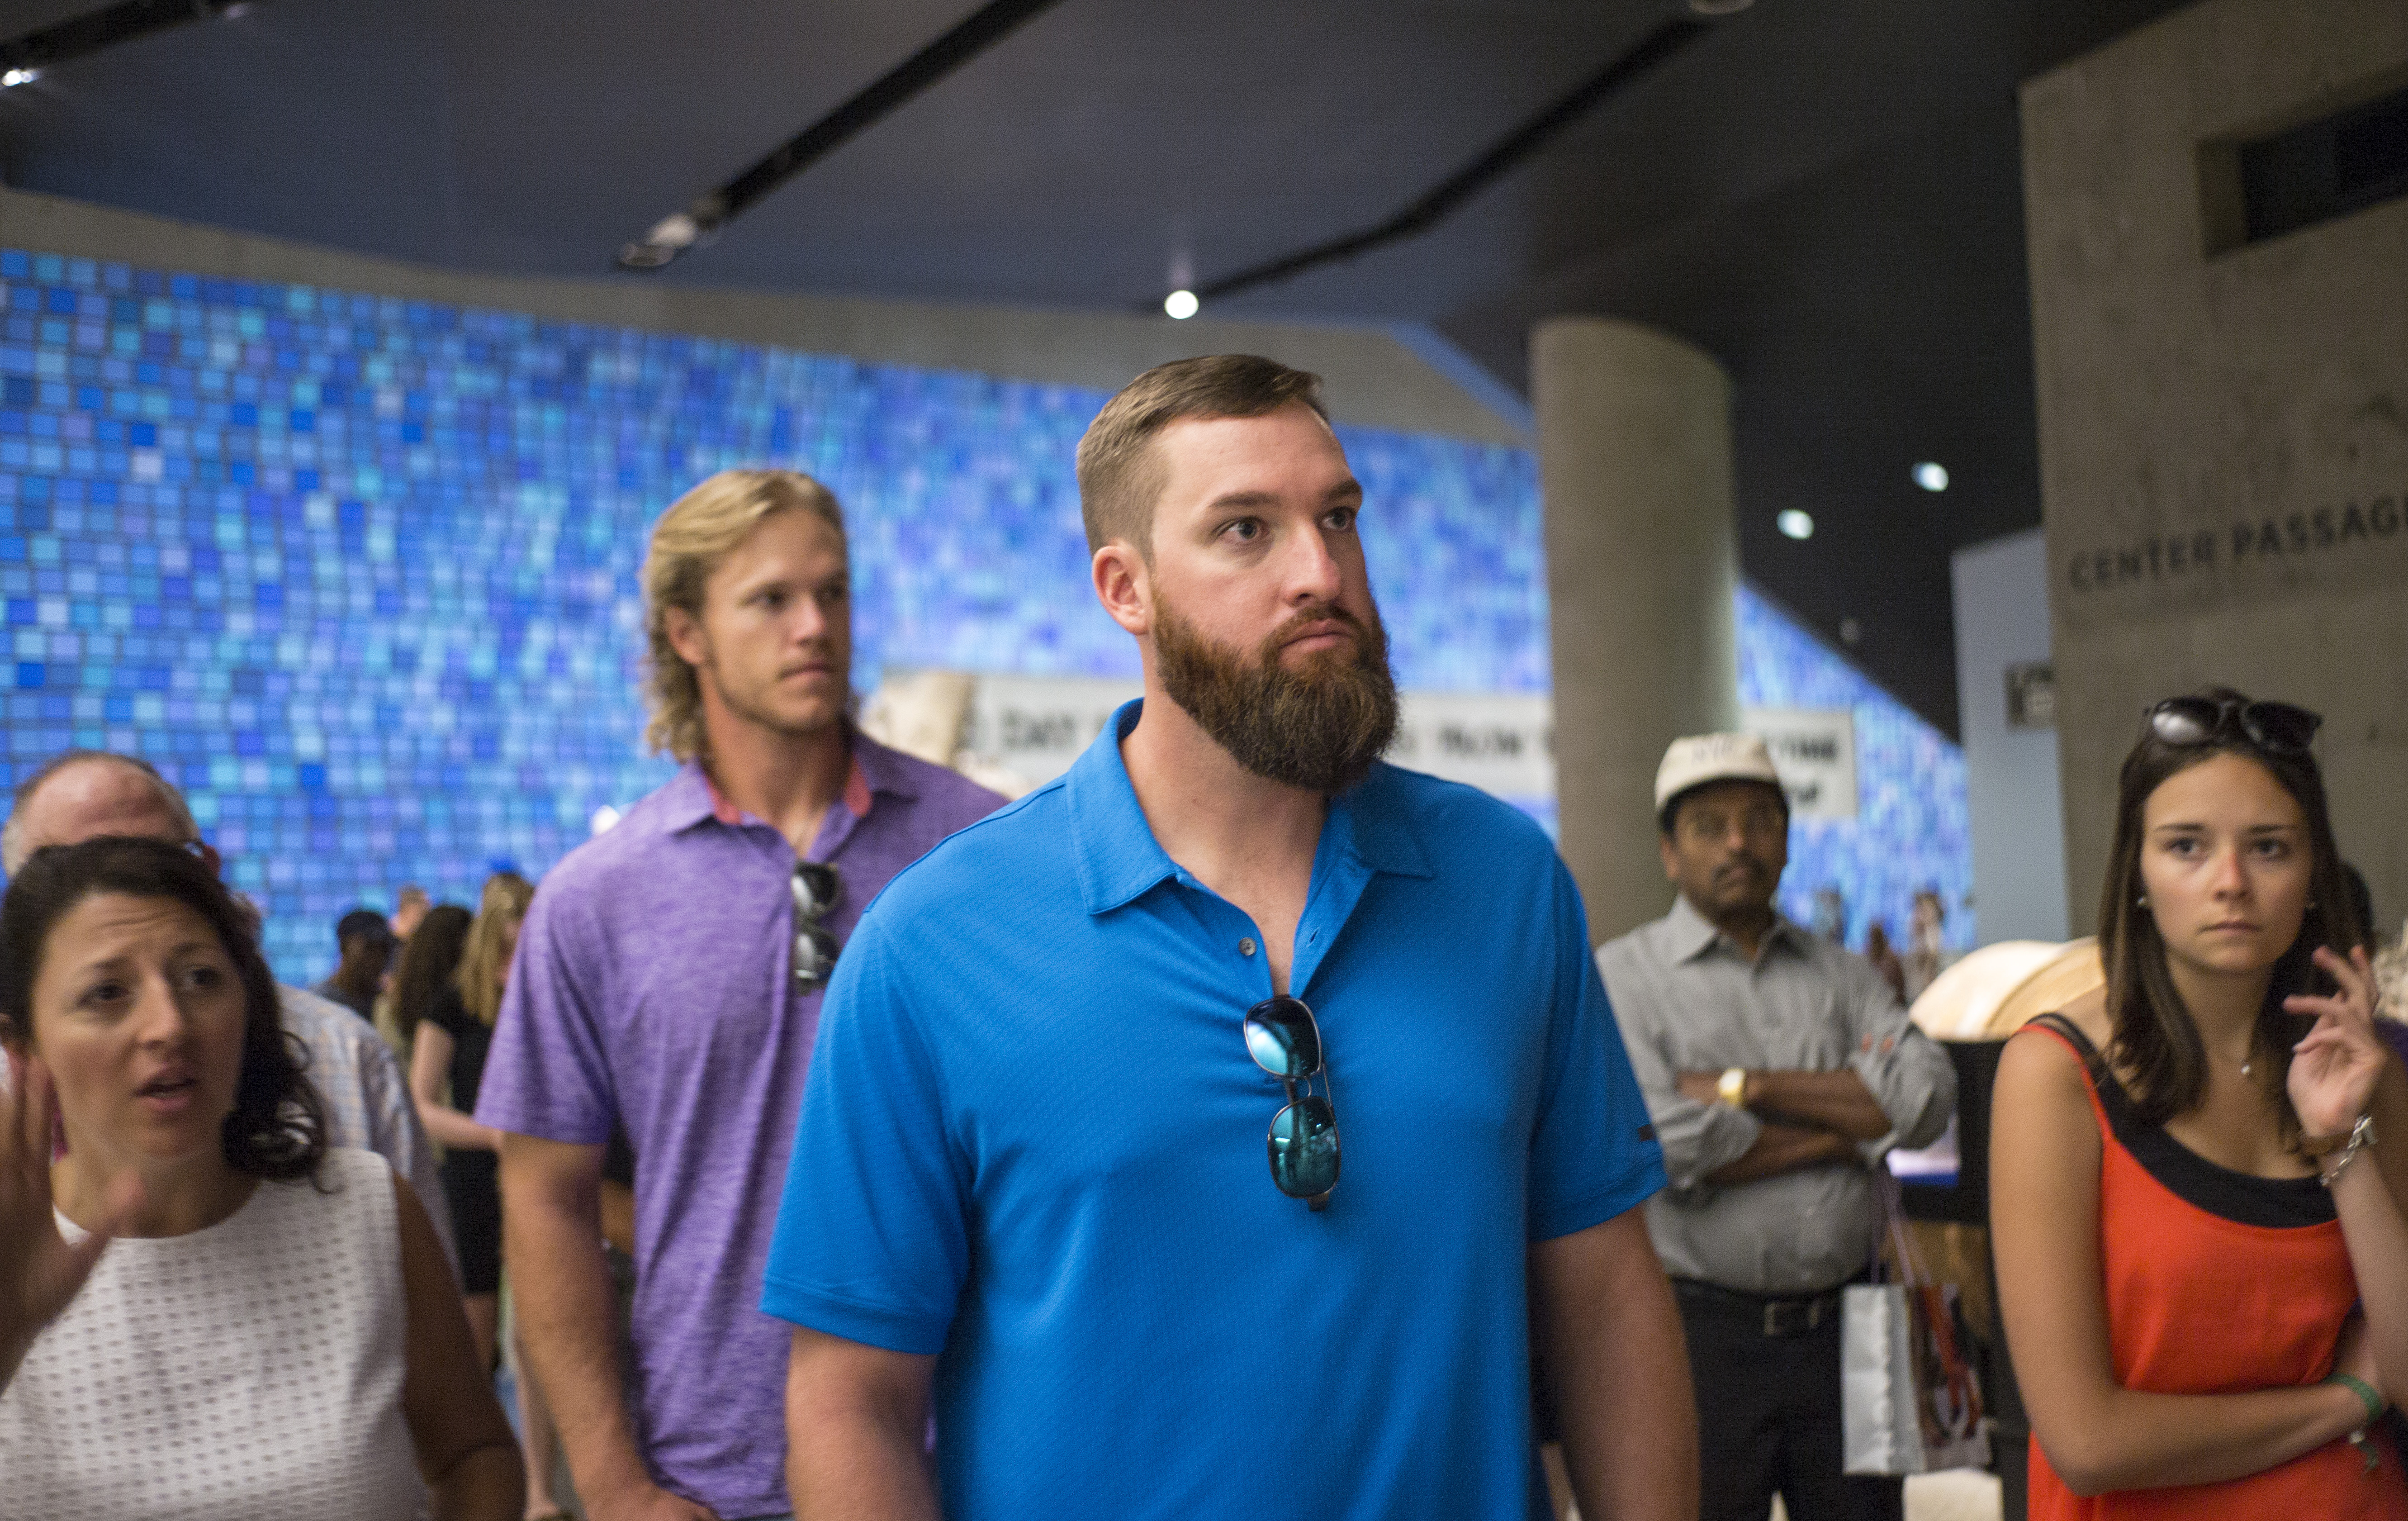 Bobby Parnell, the former Mets pitcher, visits the 9/11 Memorial Museum. Other visitors stand behind him.